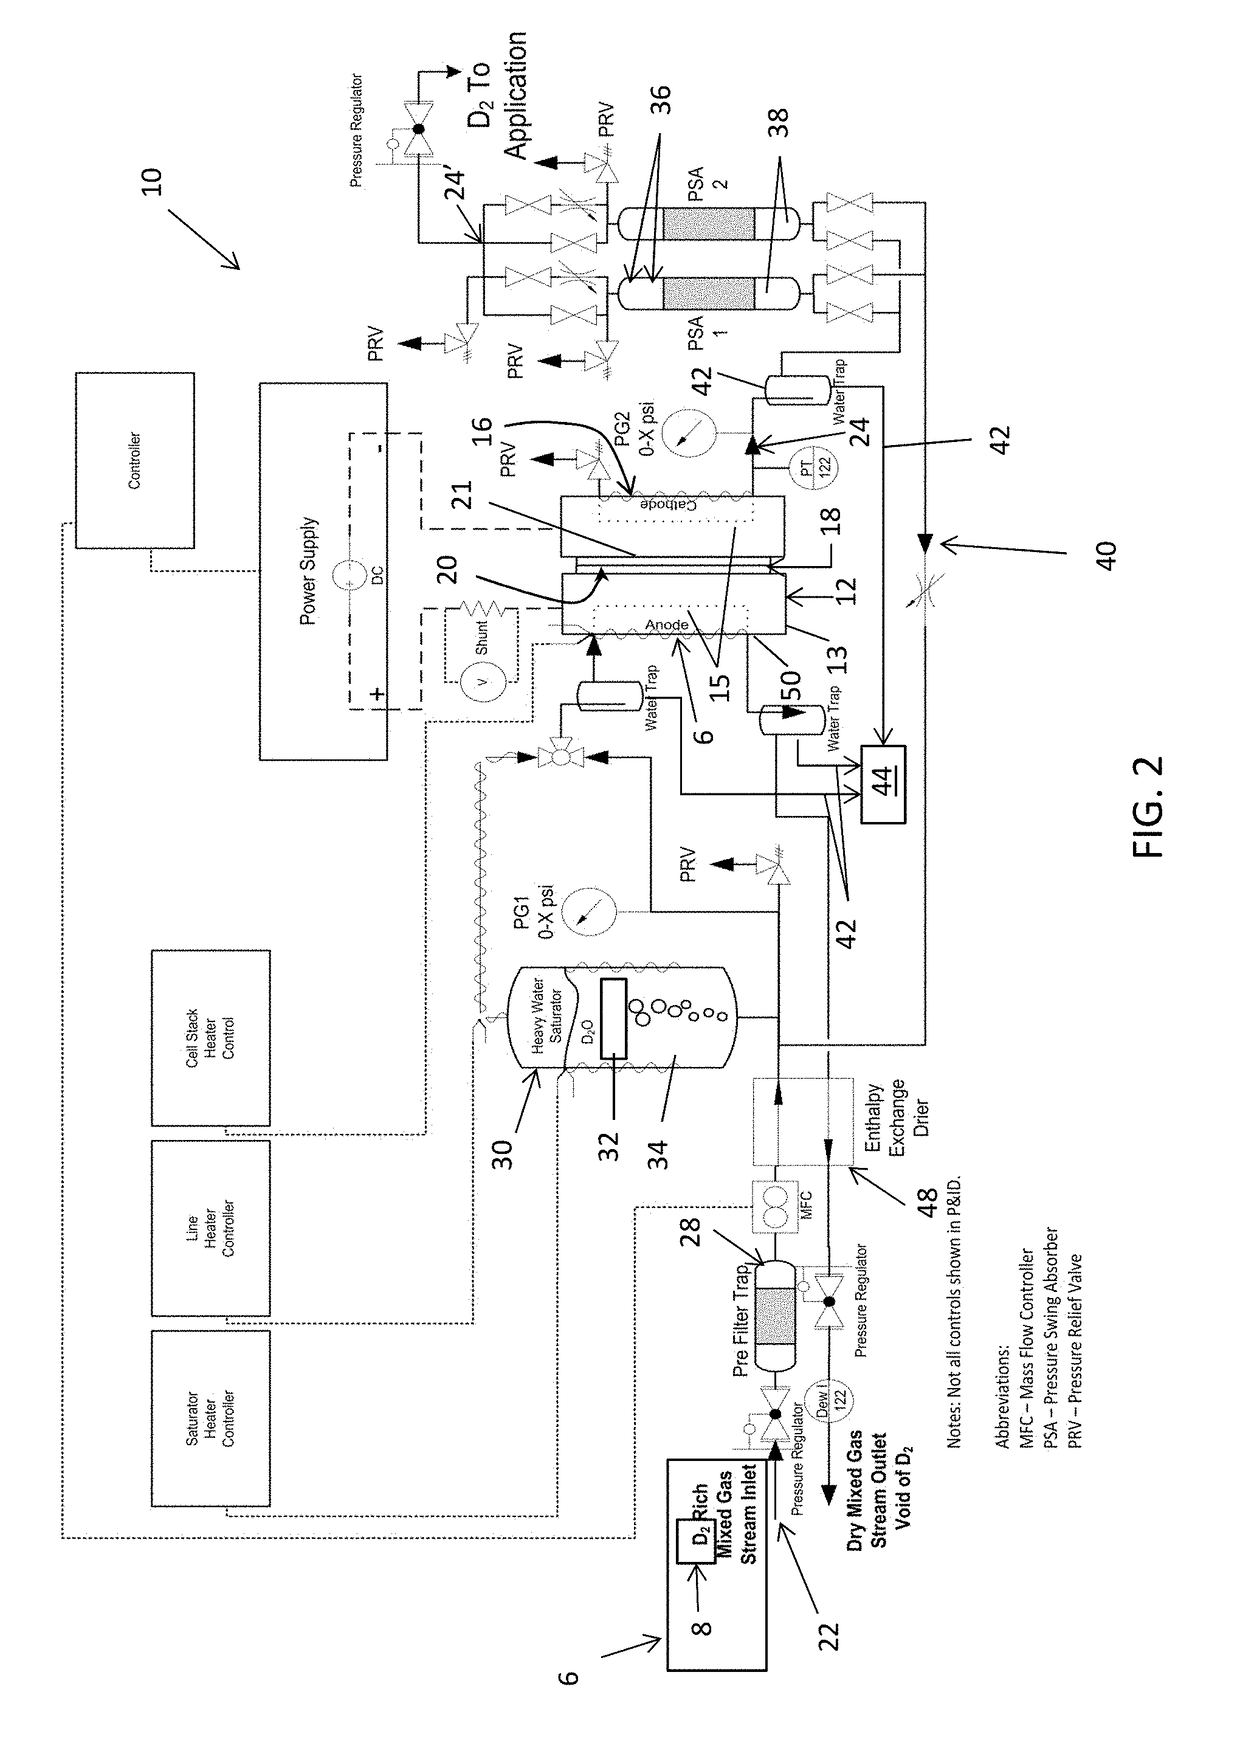 Method and apparatus providing high purity diatomic molecules of hydrogen isotopes